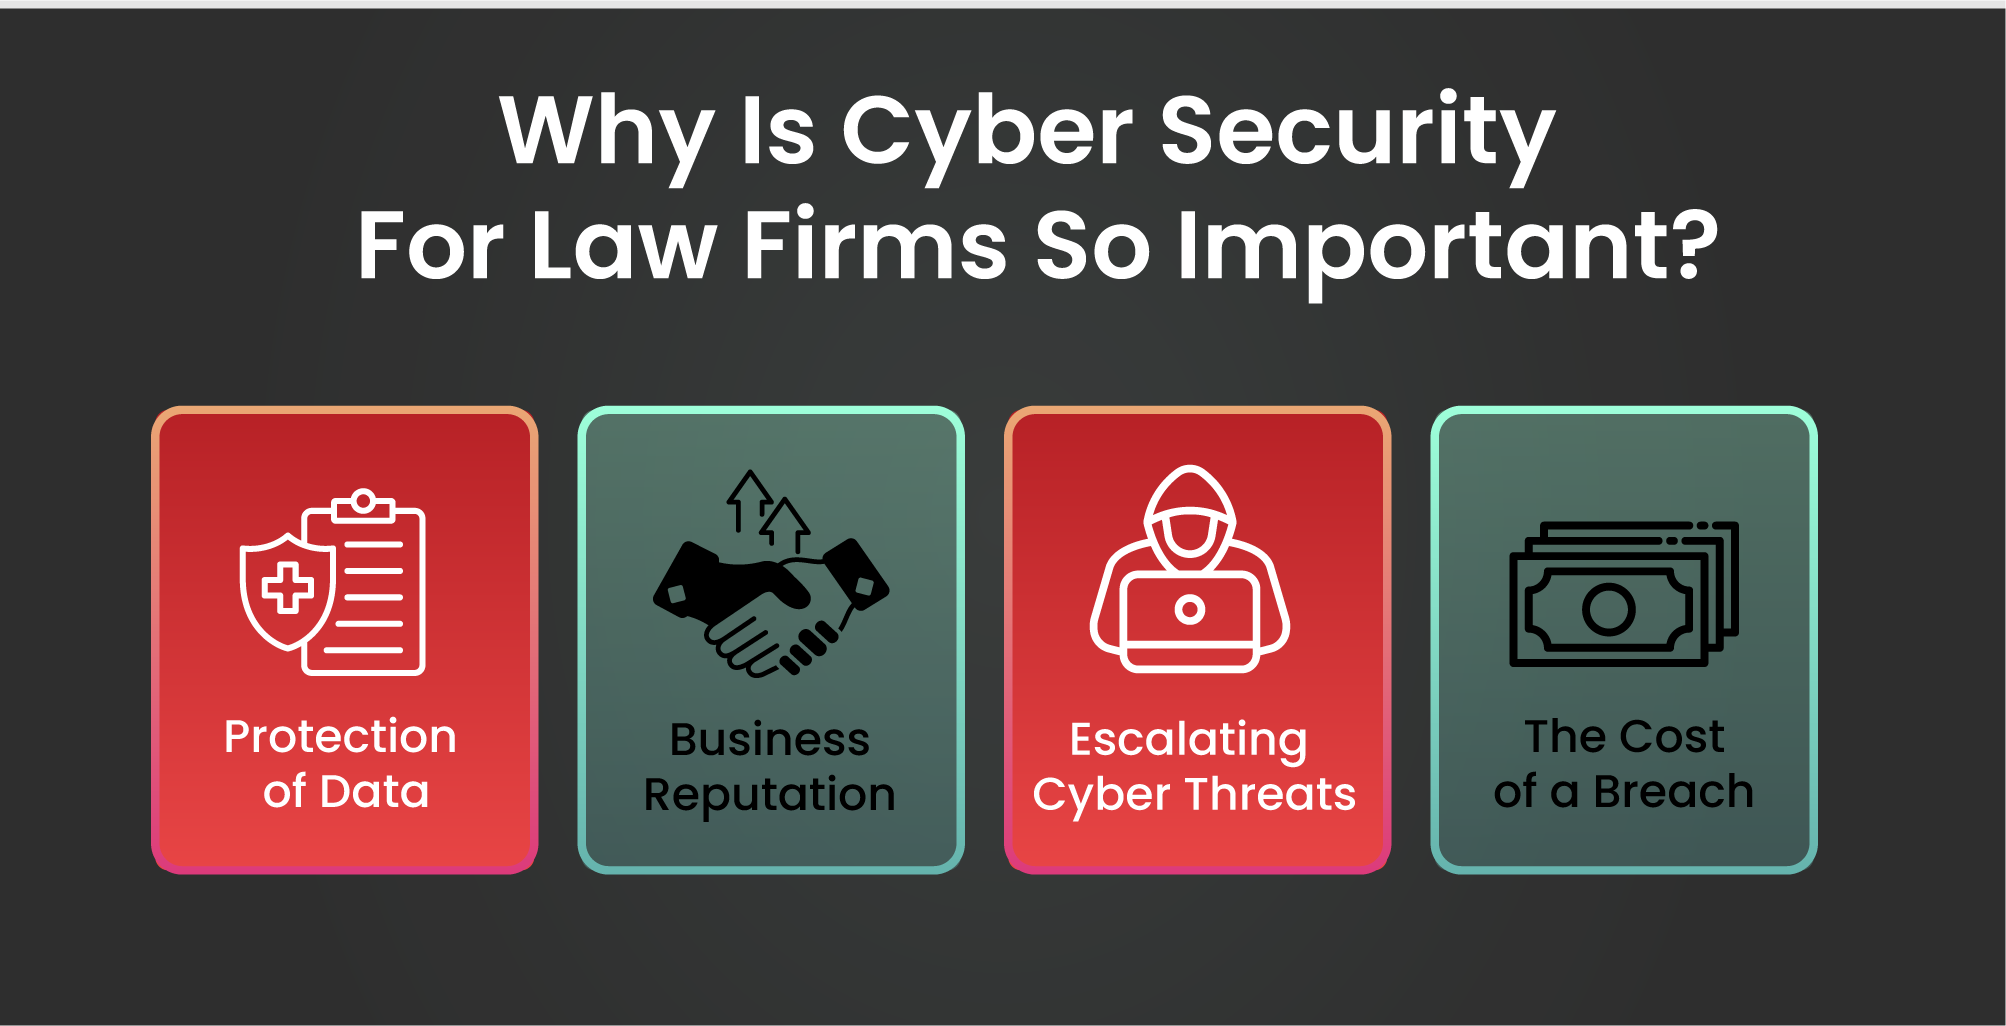 Cyber Security For Law Firms - Why Is It So Important?